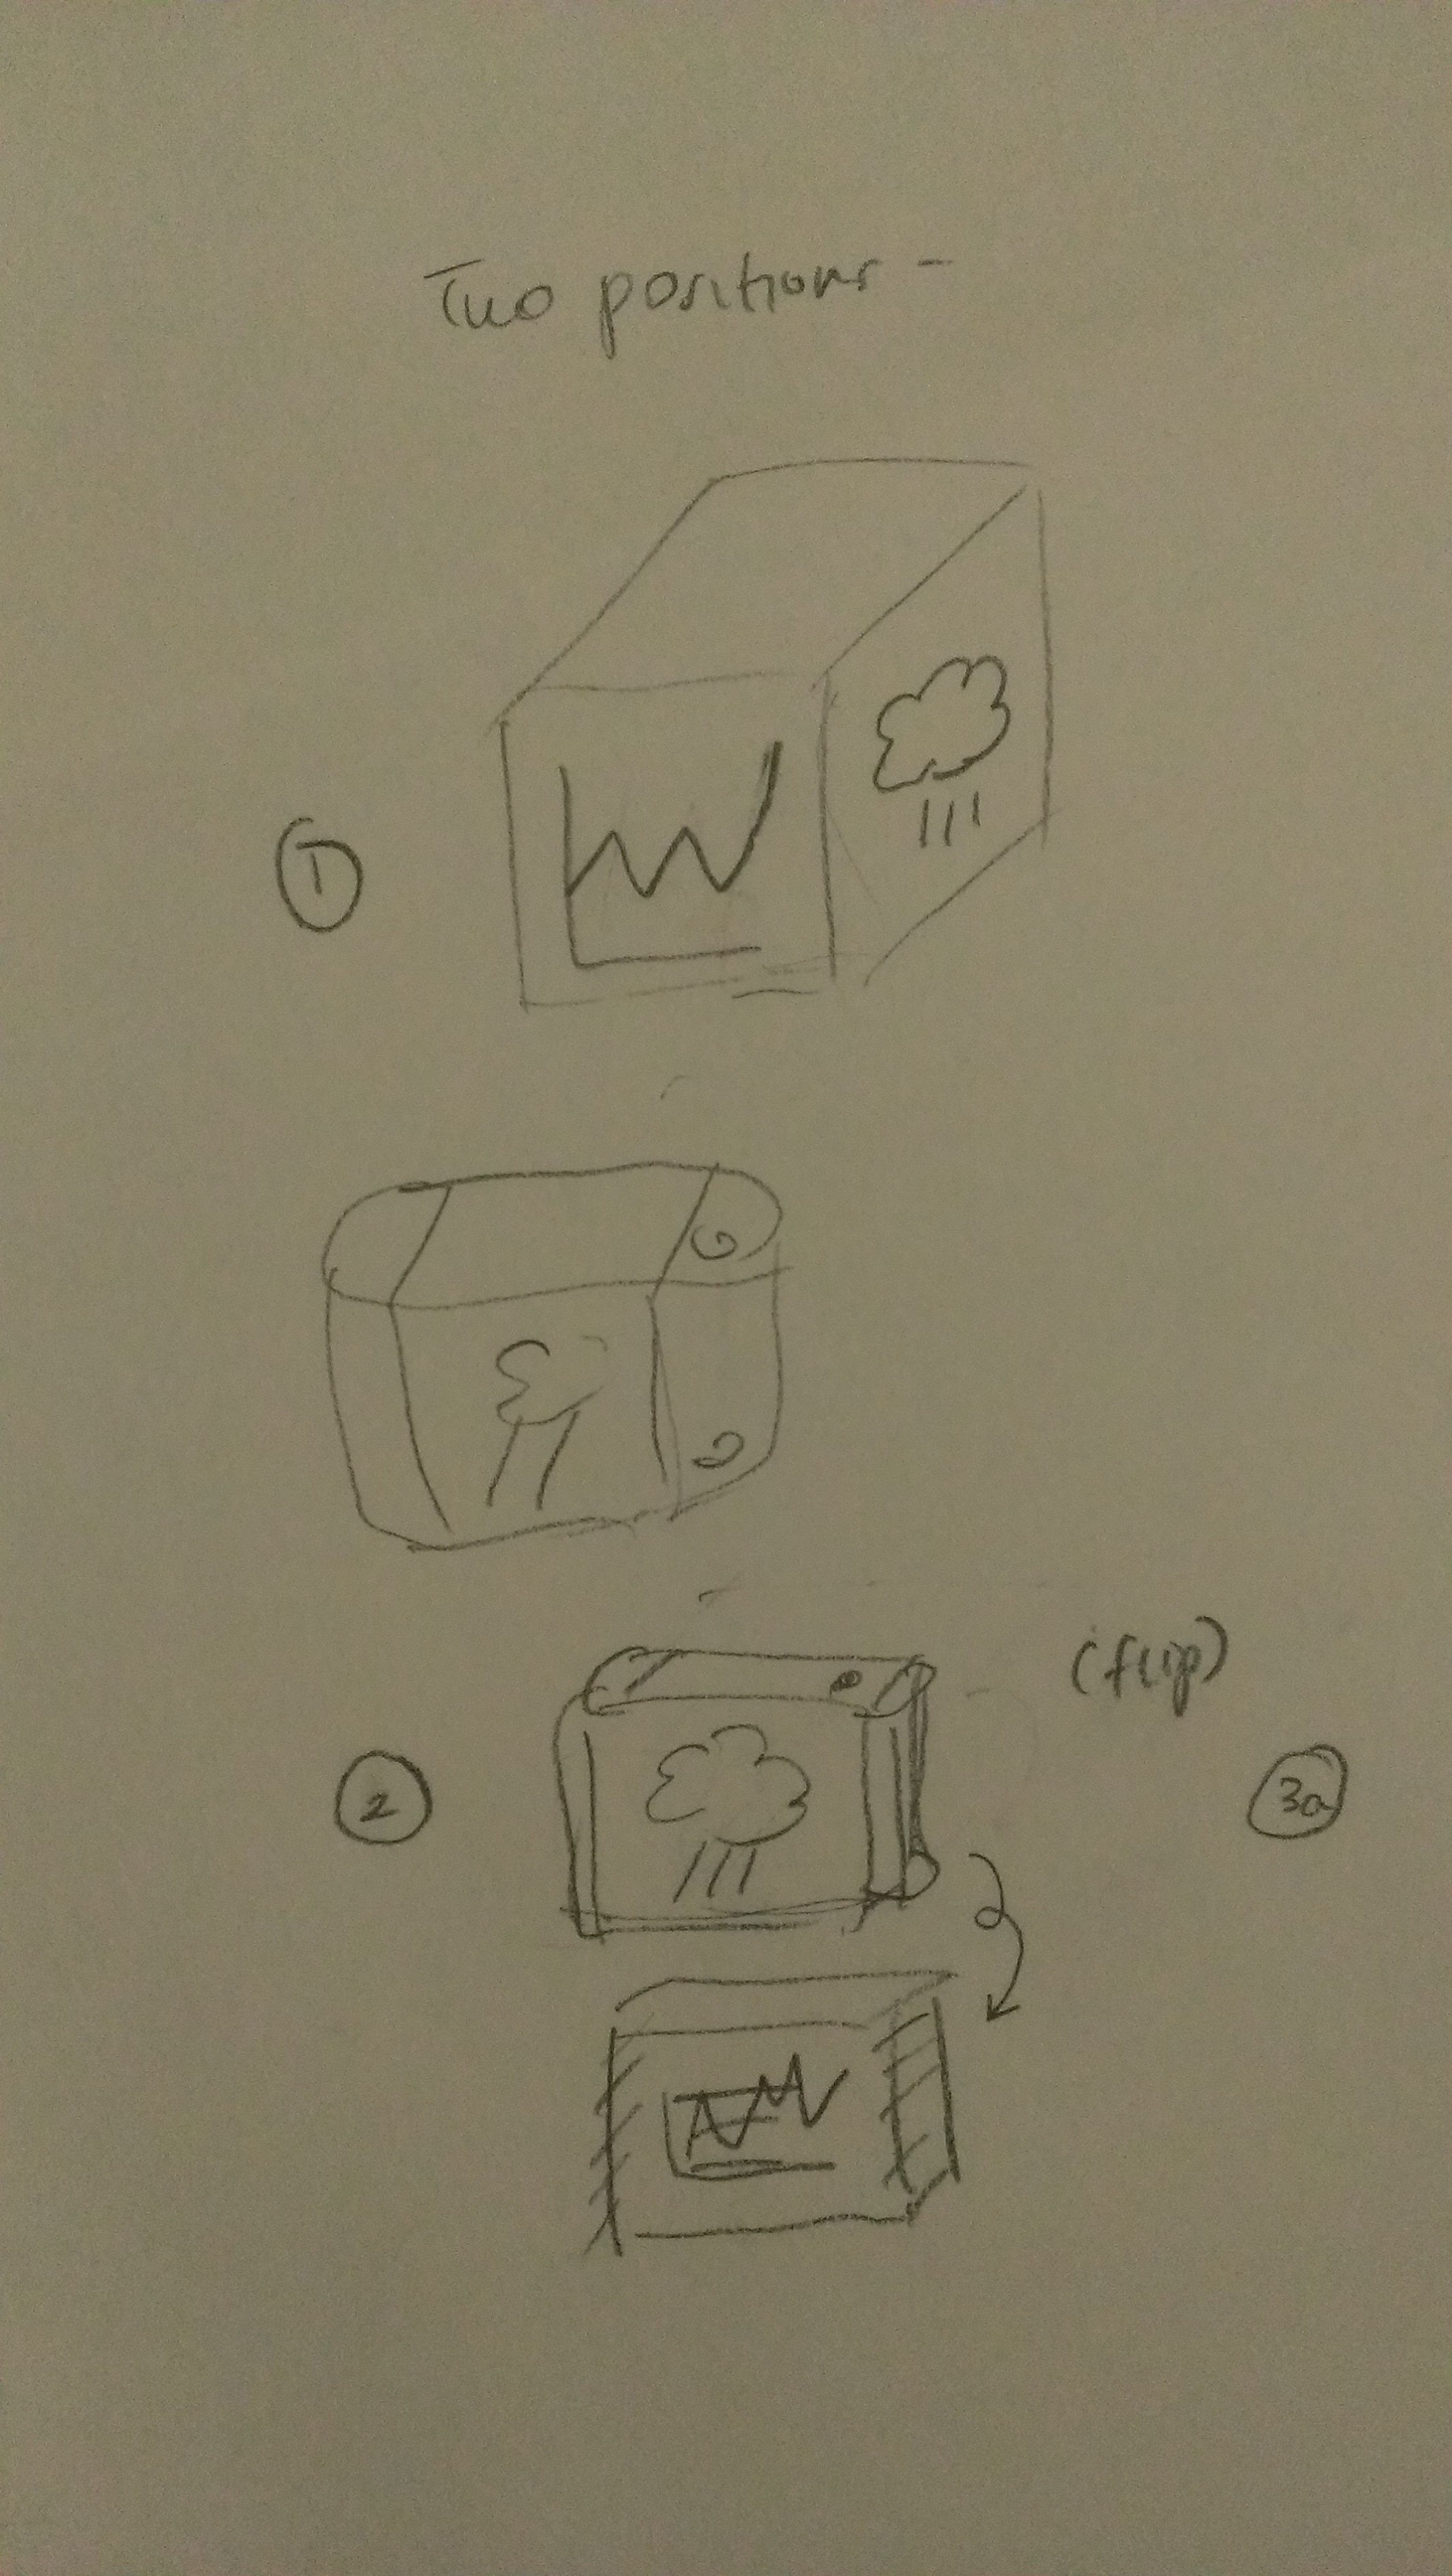 More Designs for the Cube